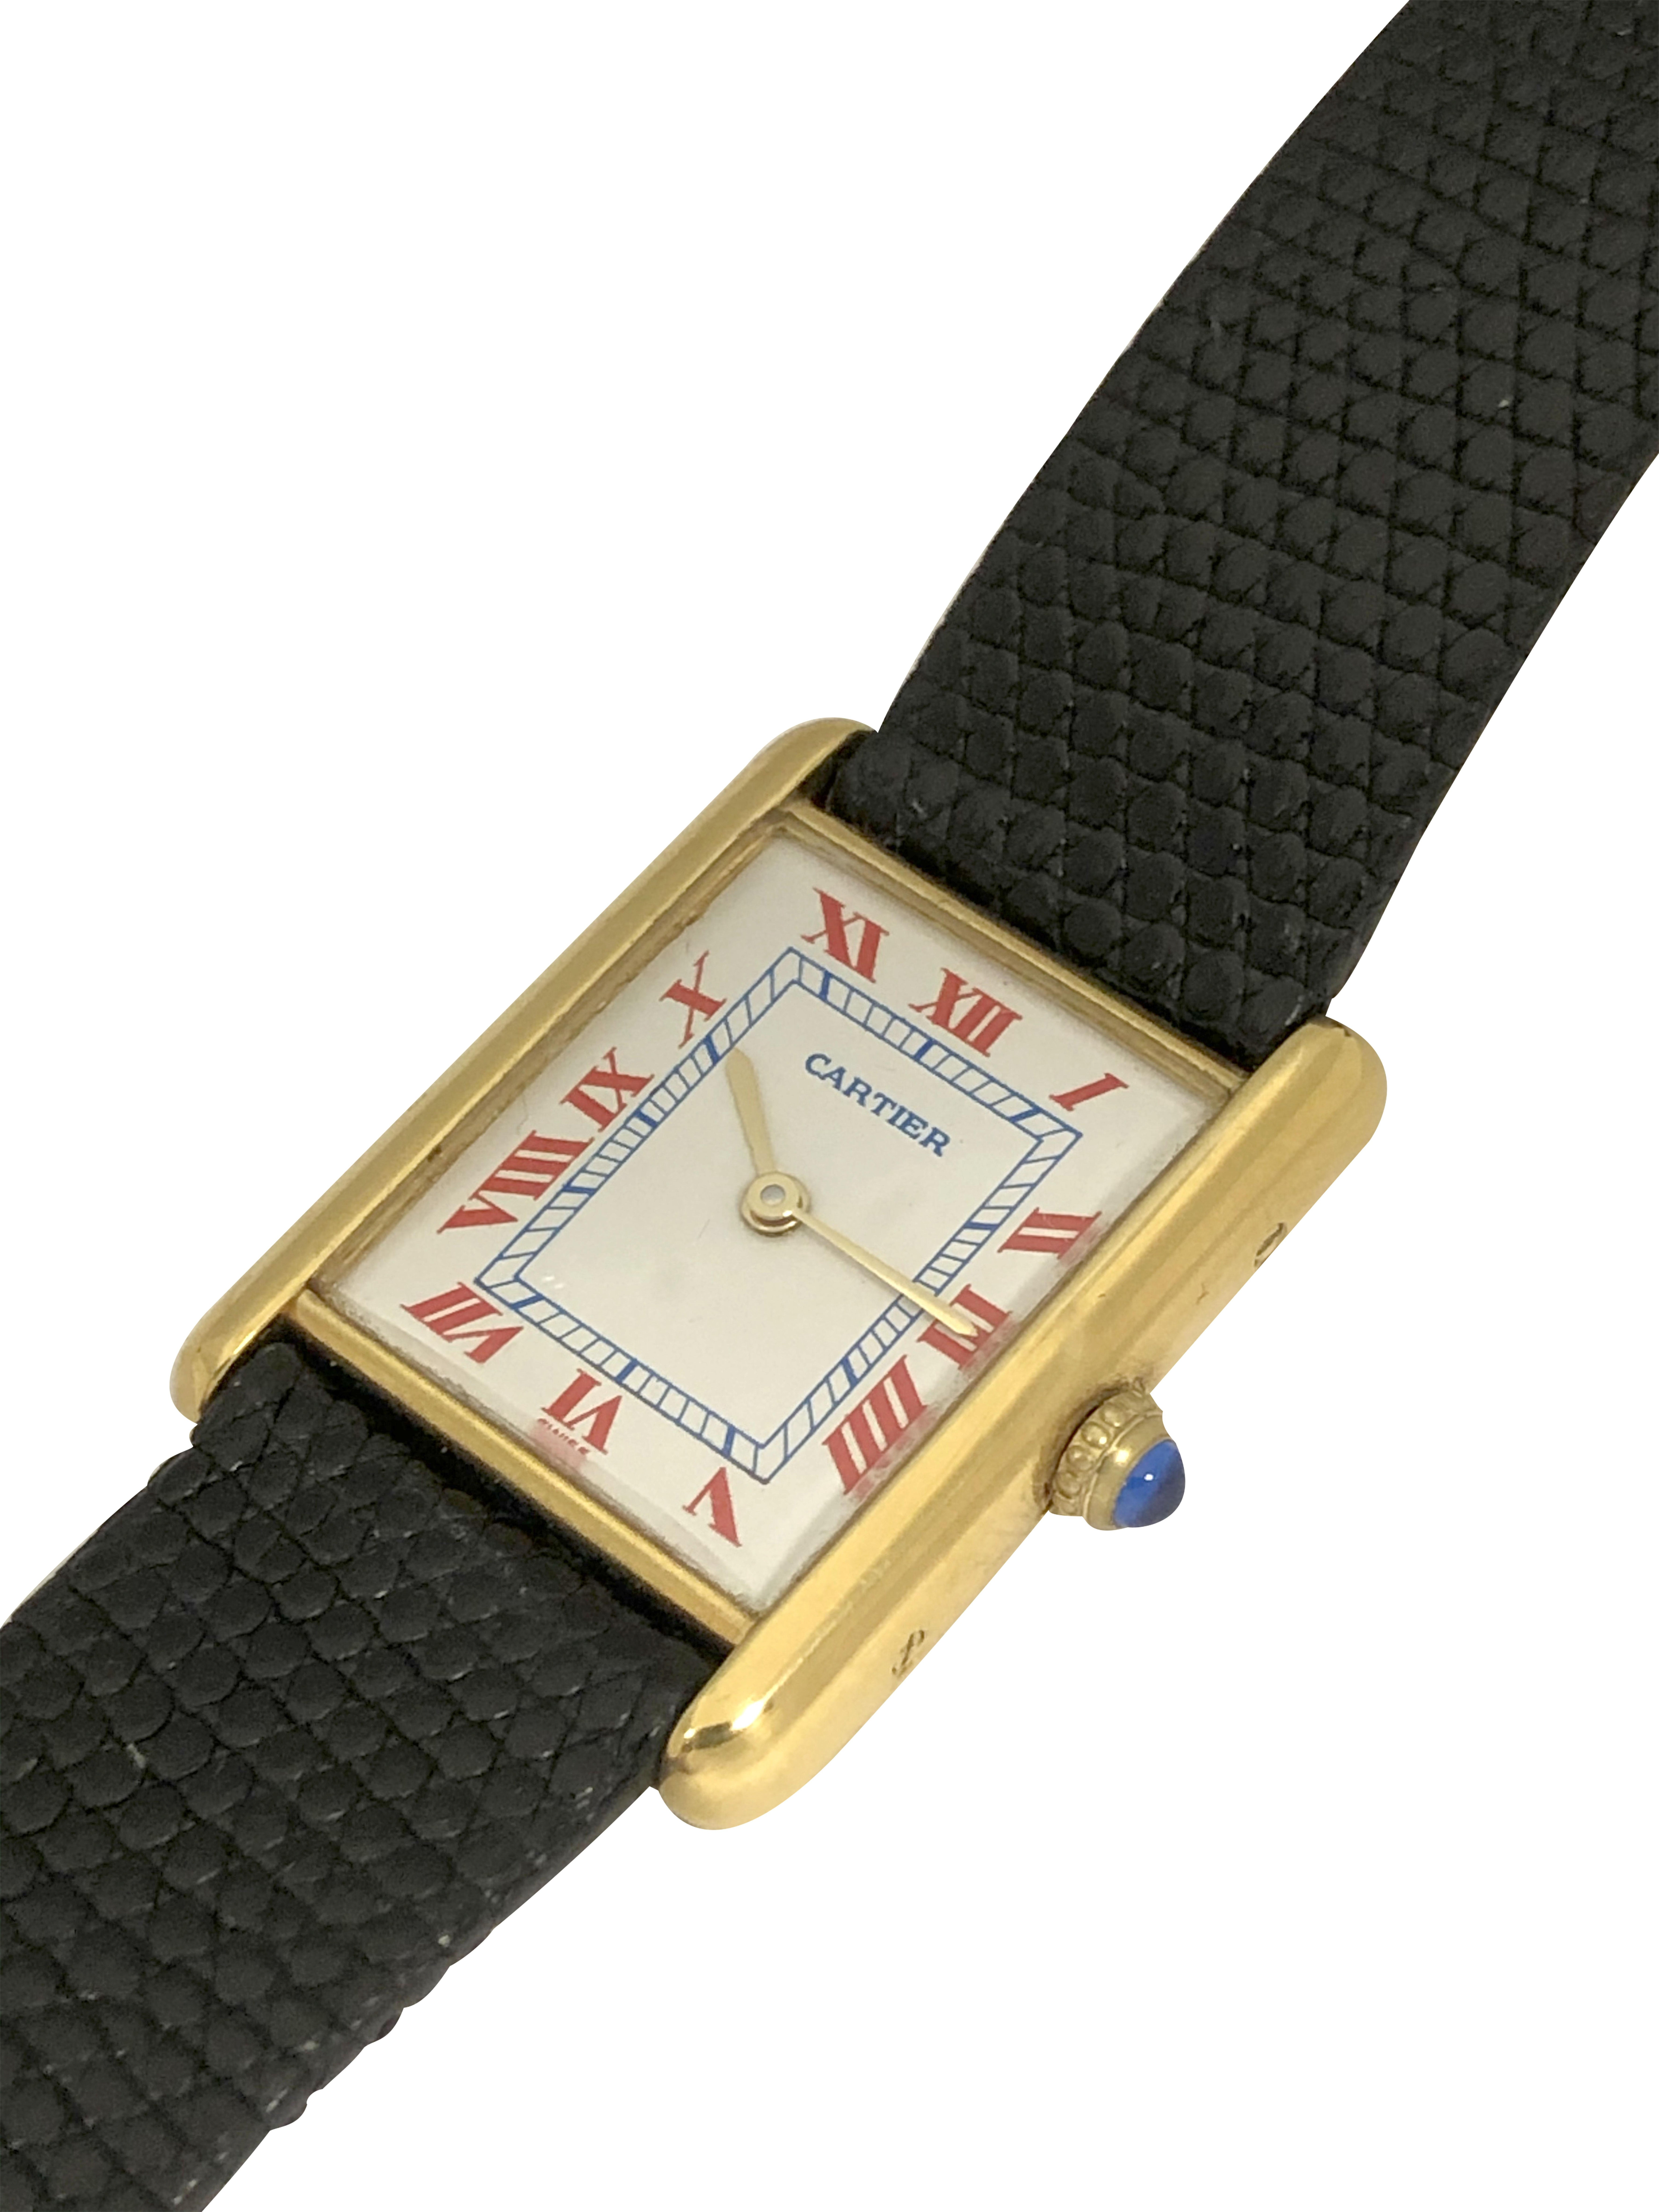 Circa 2005 Cartier Classic Tank Wrist Watch, 30 X 24 M.M. 2 Piece Vermeil ( Gold plate on Sterling Silver ) case. Quartz Movement, Sapphire Crown, White Dial with Red Roman numerals and Blue inner Track. New Black Lizard strap with original Cartier